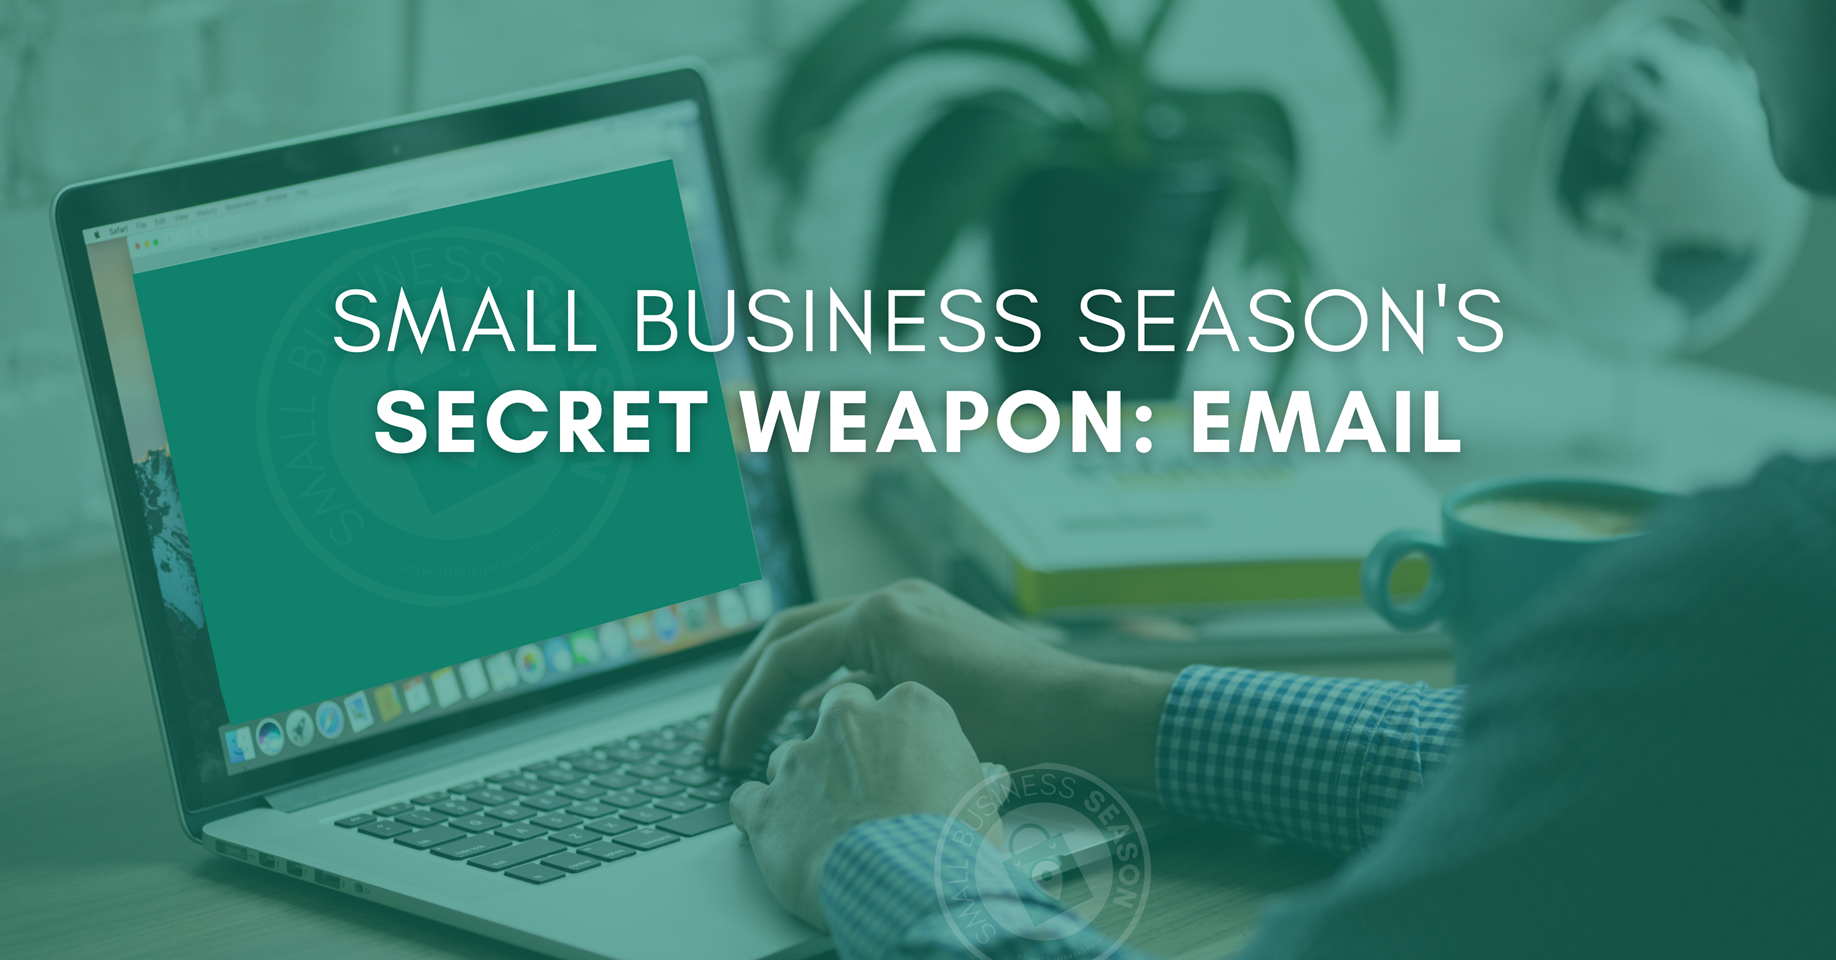 Small Business Season’s Secret Weapon: Email